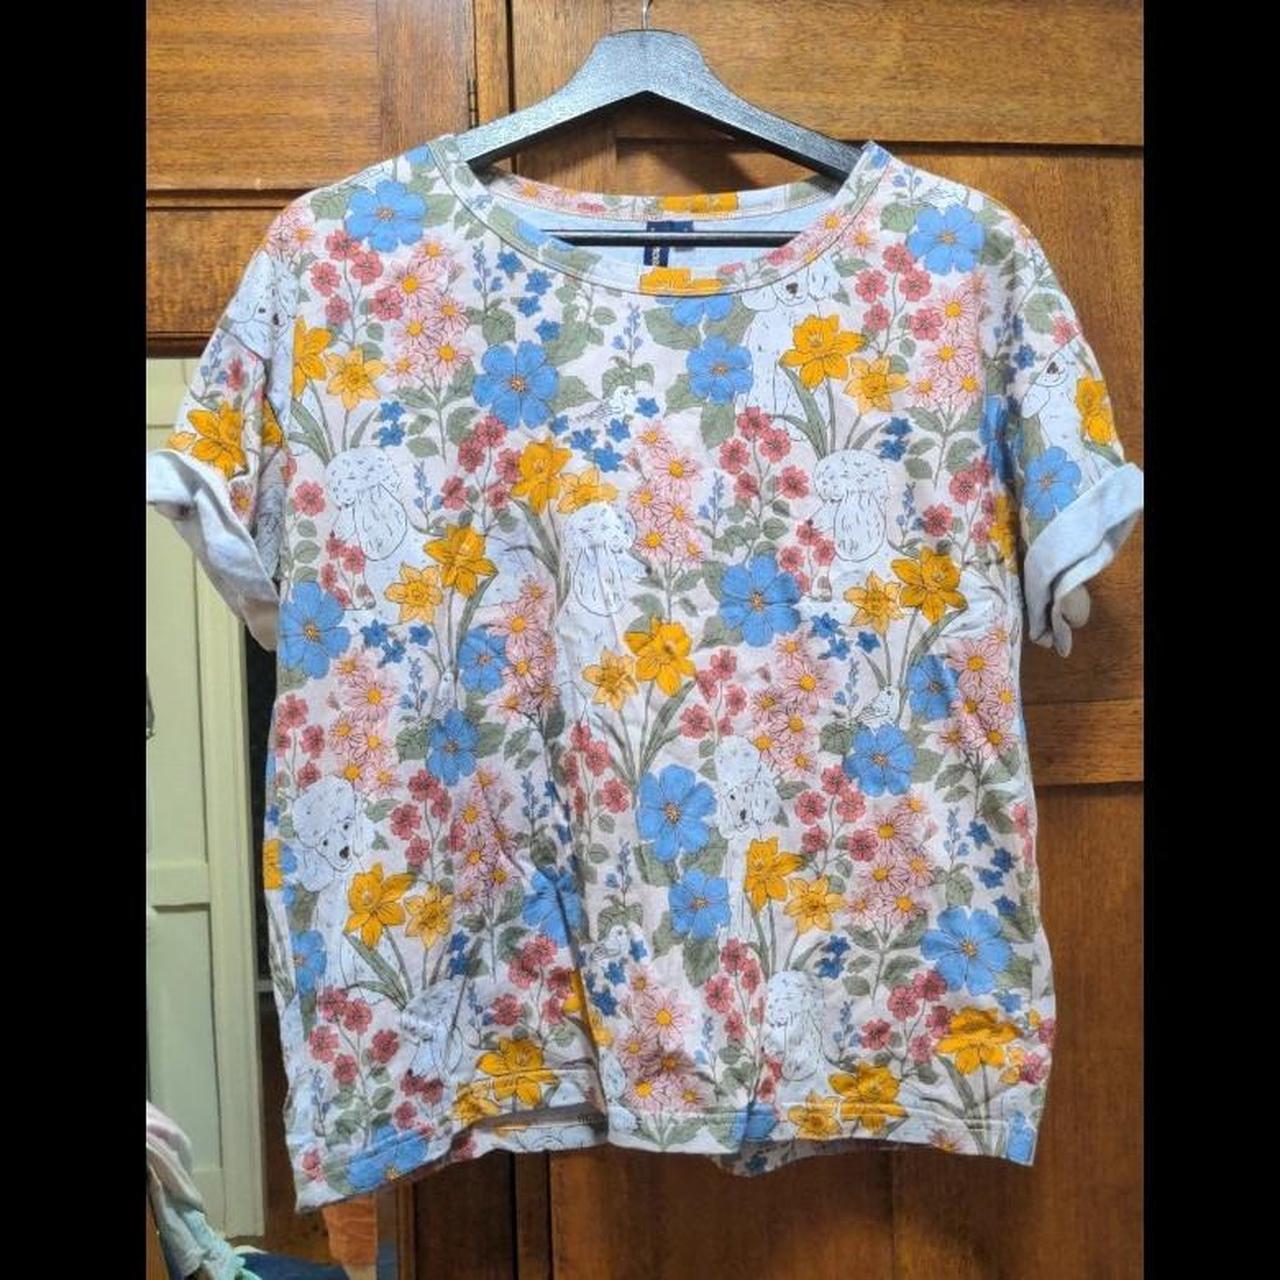 Princess Highway t-shirt with poodles and flowers on... - Depop